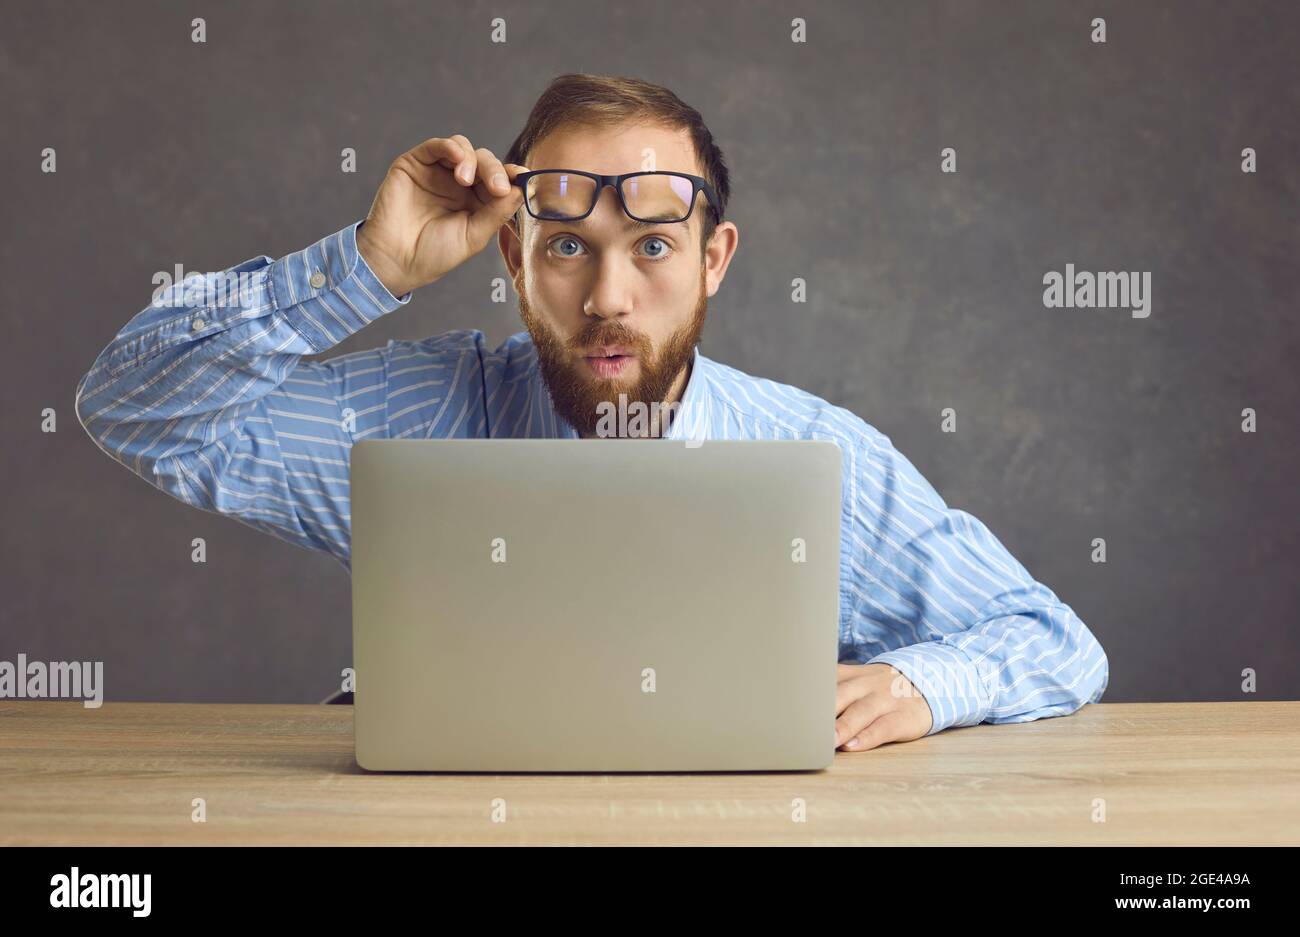 Surprised worker takes off glasses and looks at something shocking happening in office Stock Photo